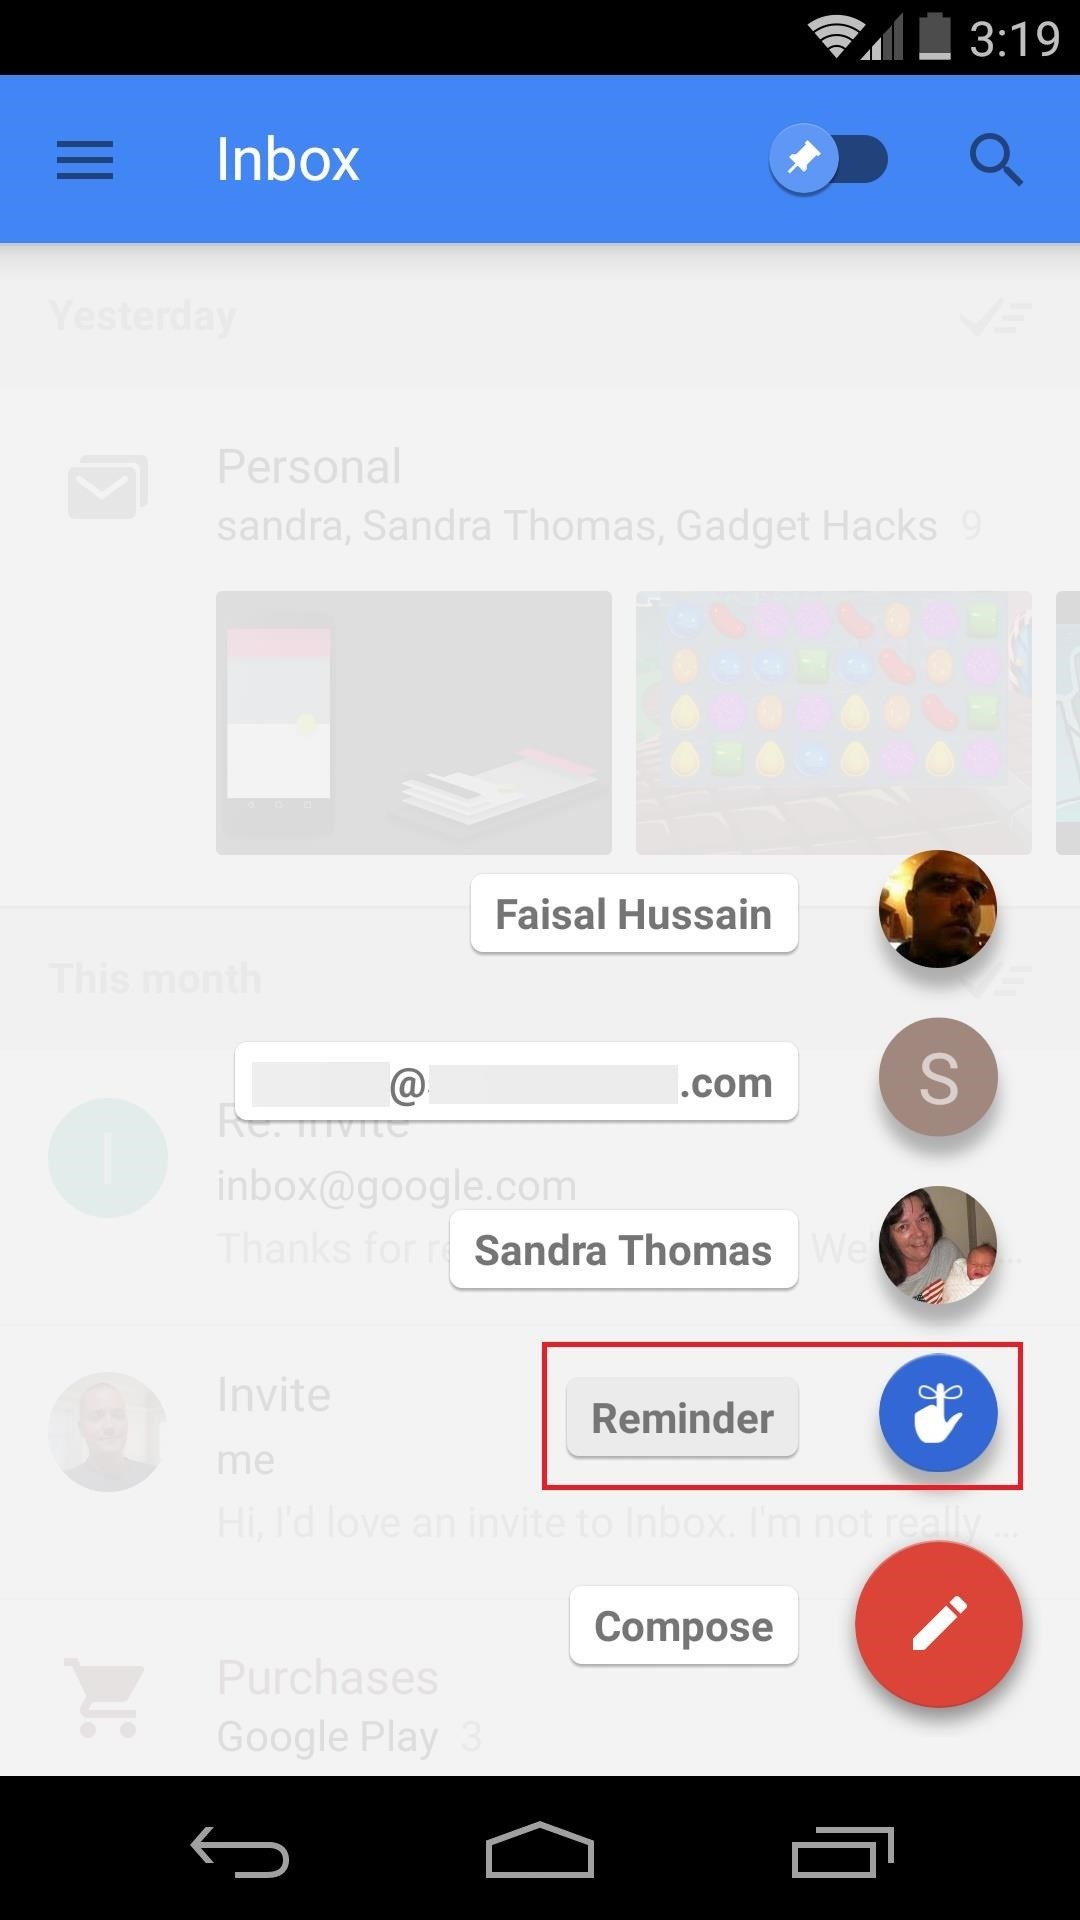 How to Get the Most Out of Google's New Inbox by Gmail